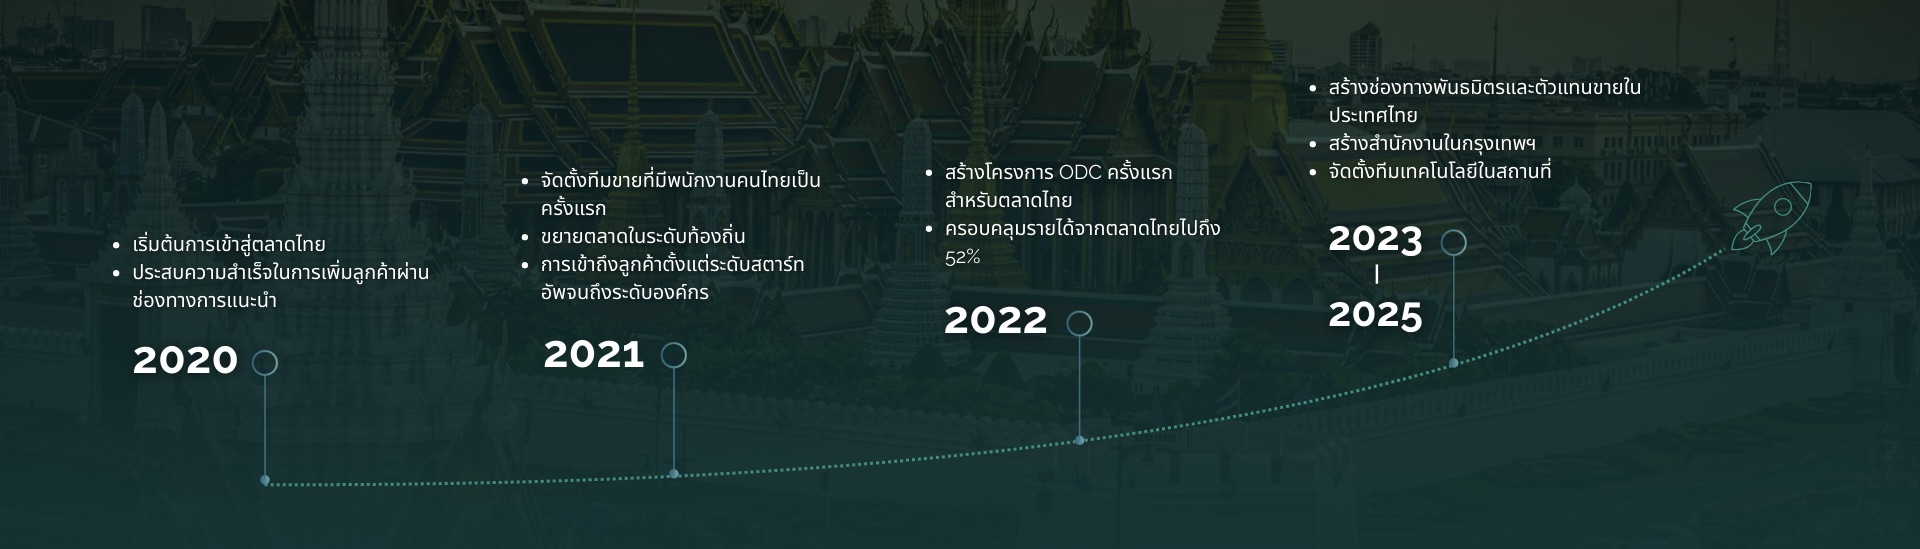 Kicked start in Thai market Reach a certain number of customers through referral channels 1